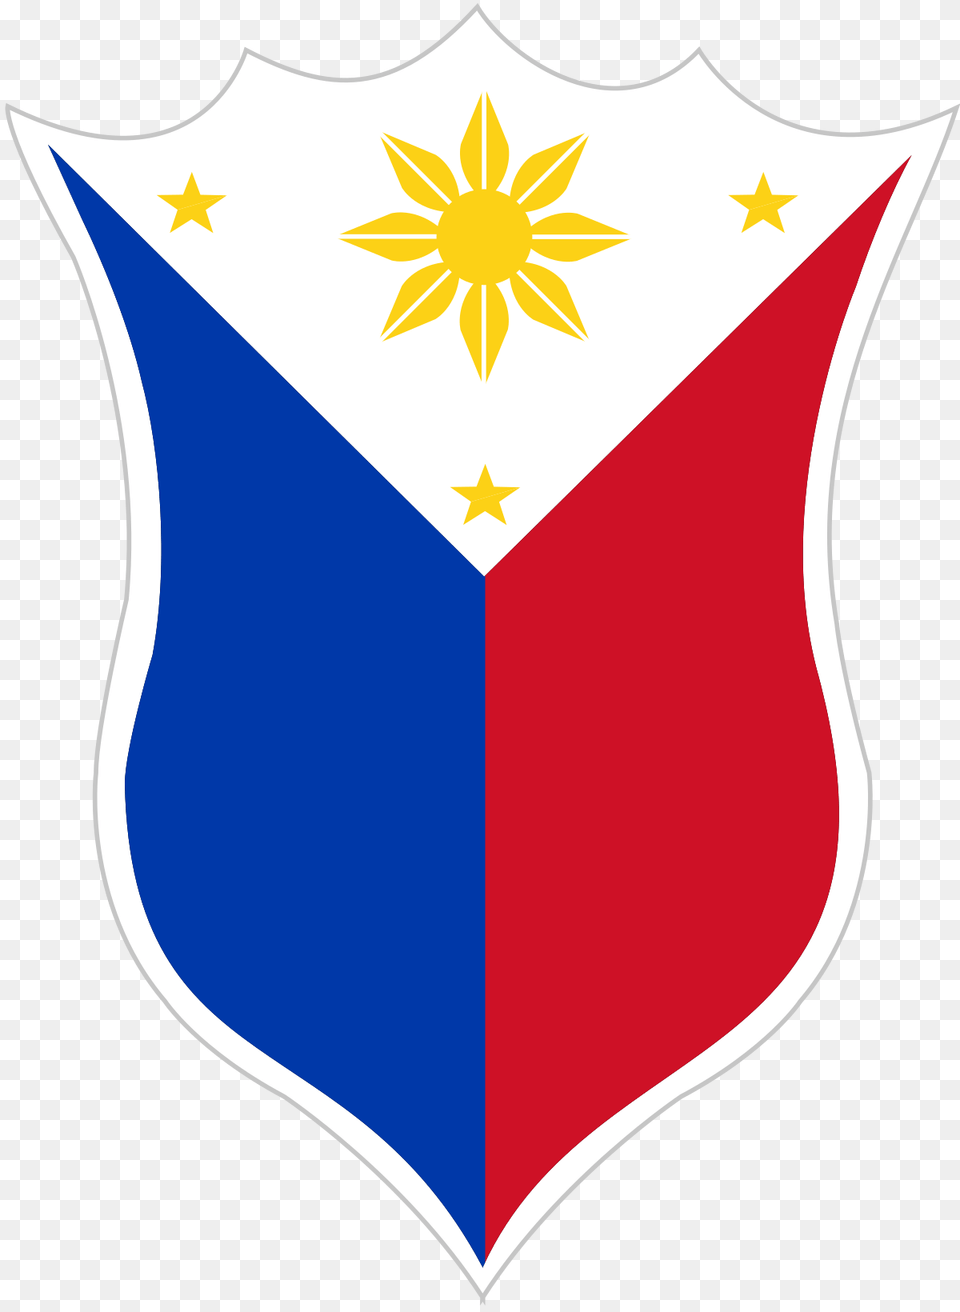 Philippines Mens National Basketball Team, Armor, Shield Png Image